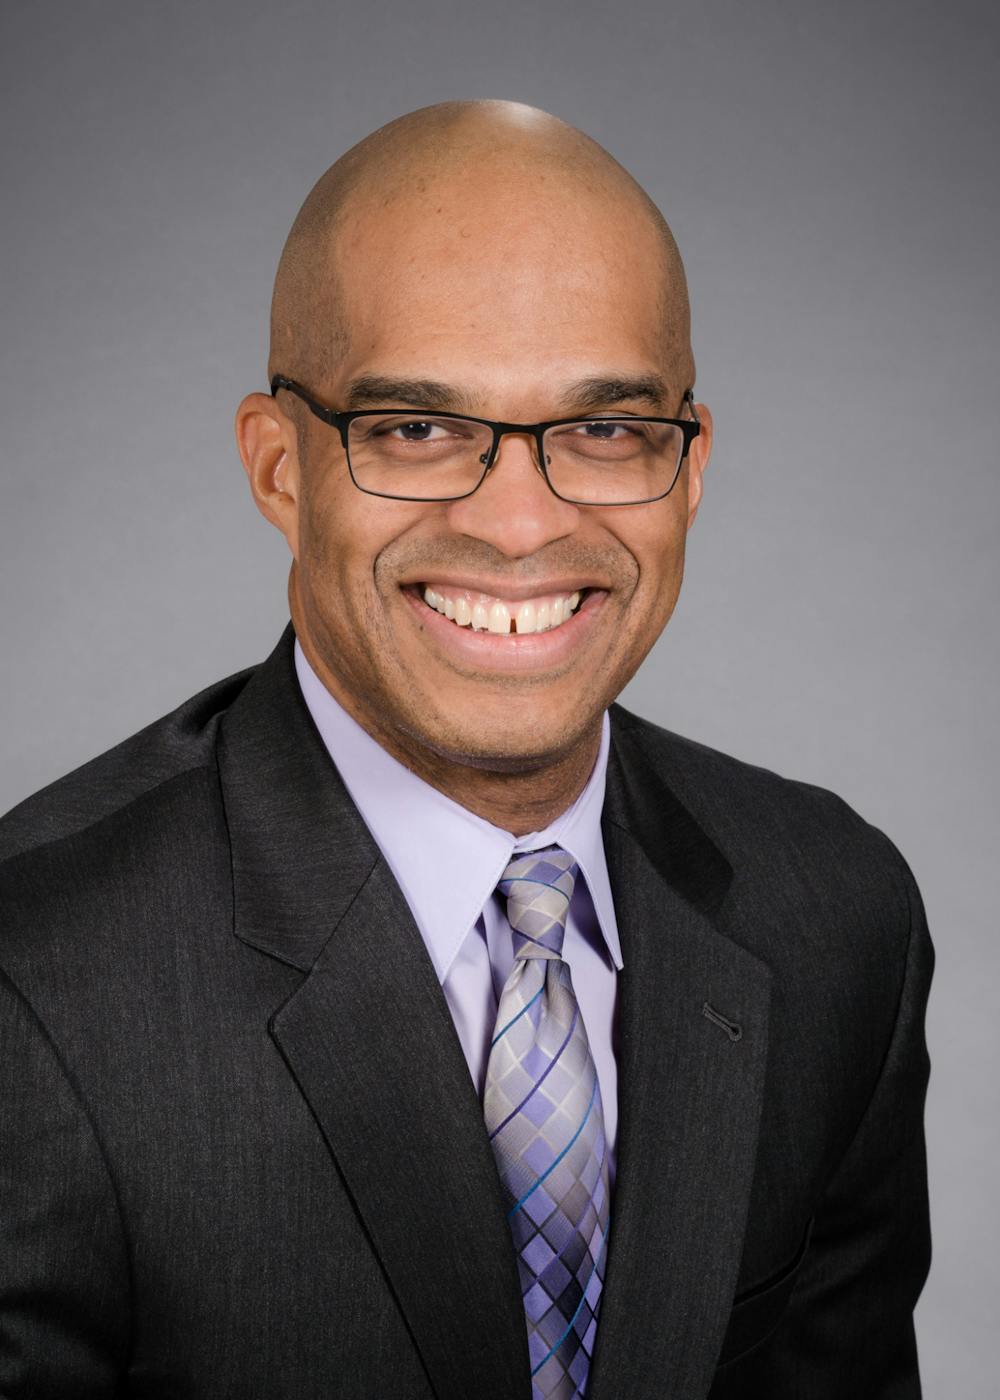 <p>Vinson will work with the Vice President for Campus Safety Rodney Chatman. He will also work with community engagement, manage responses to incidents on campus and direct supervisors and line personnel within the department.</p><p>Courtesy of John Vinson</p>